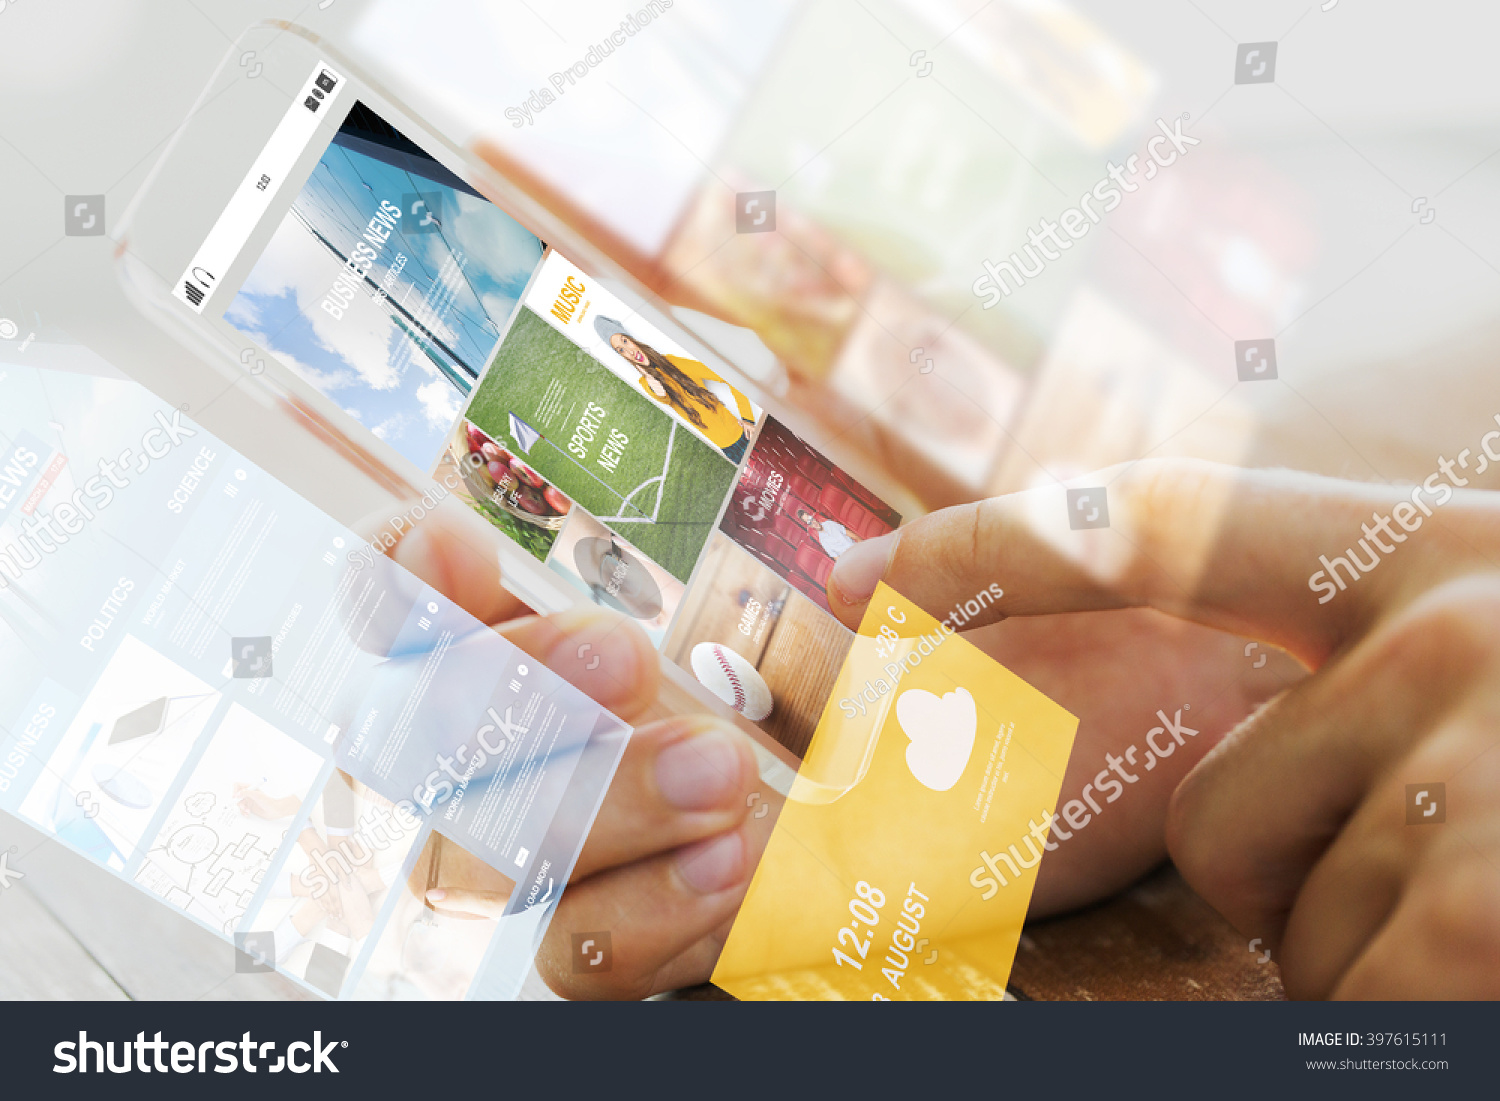 business, technology, mass media and people concept - close up of male hand holding transparent smartphone with internet news web page on screen #397615111